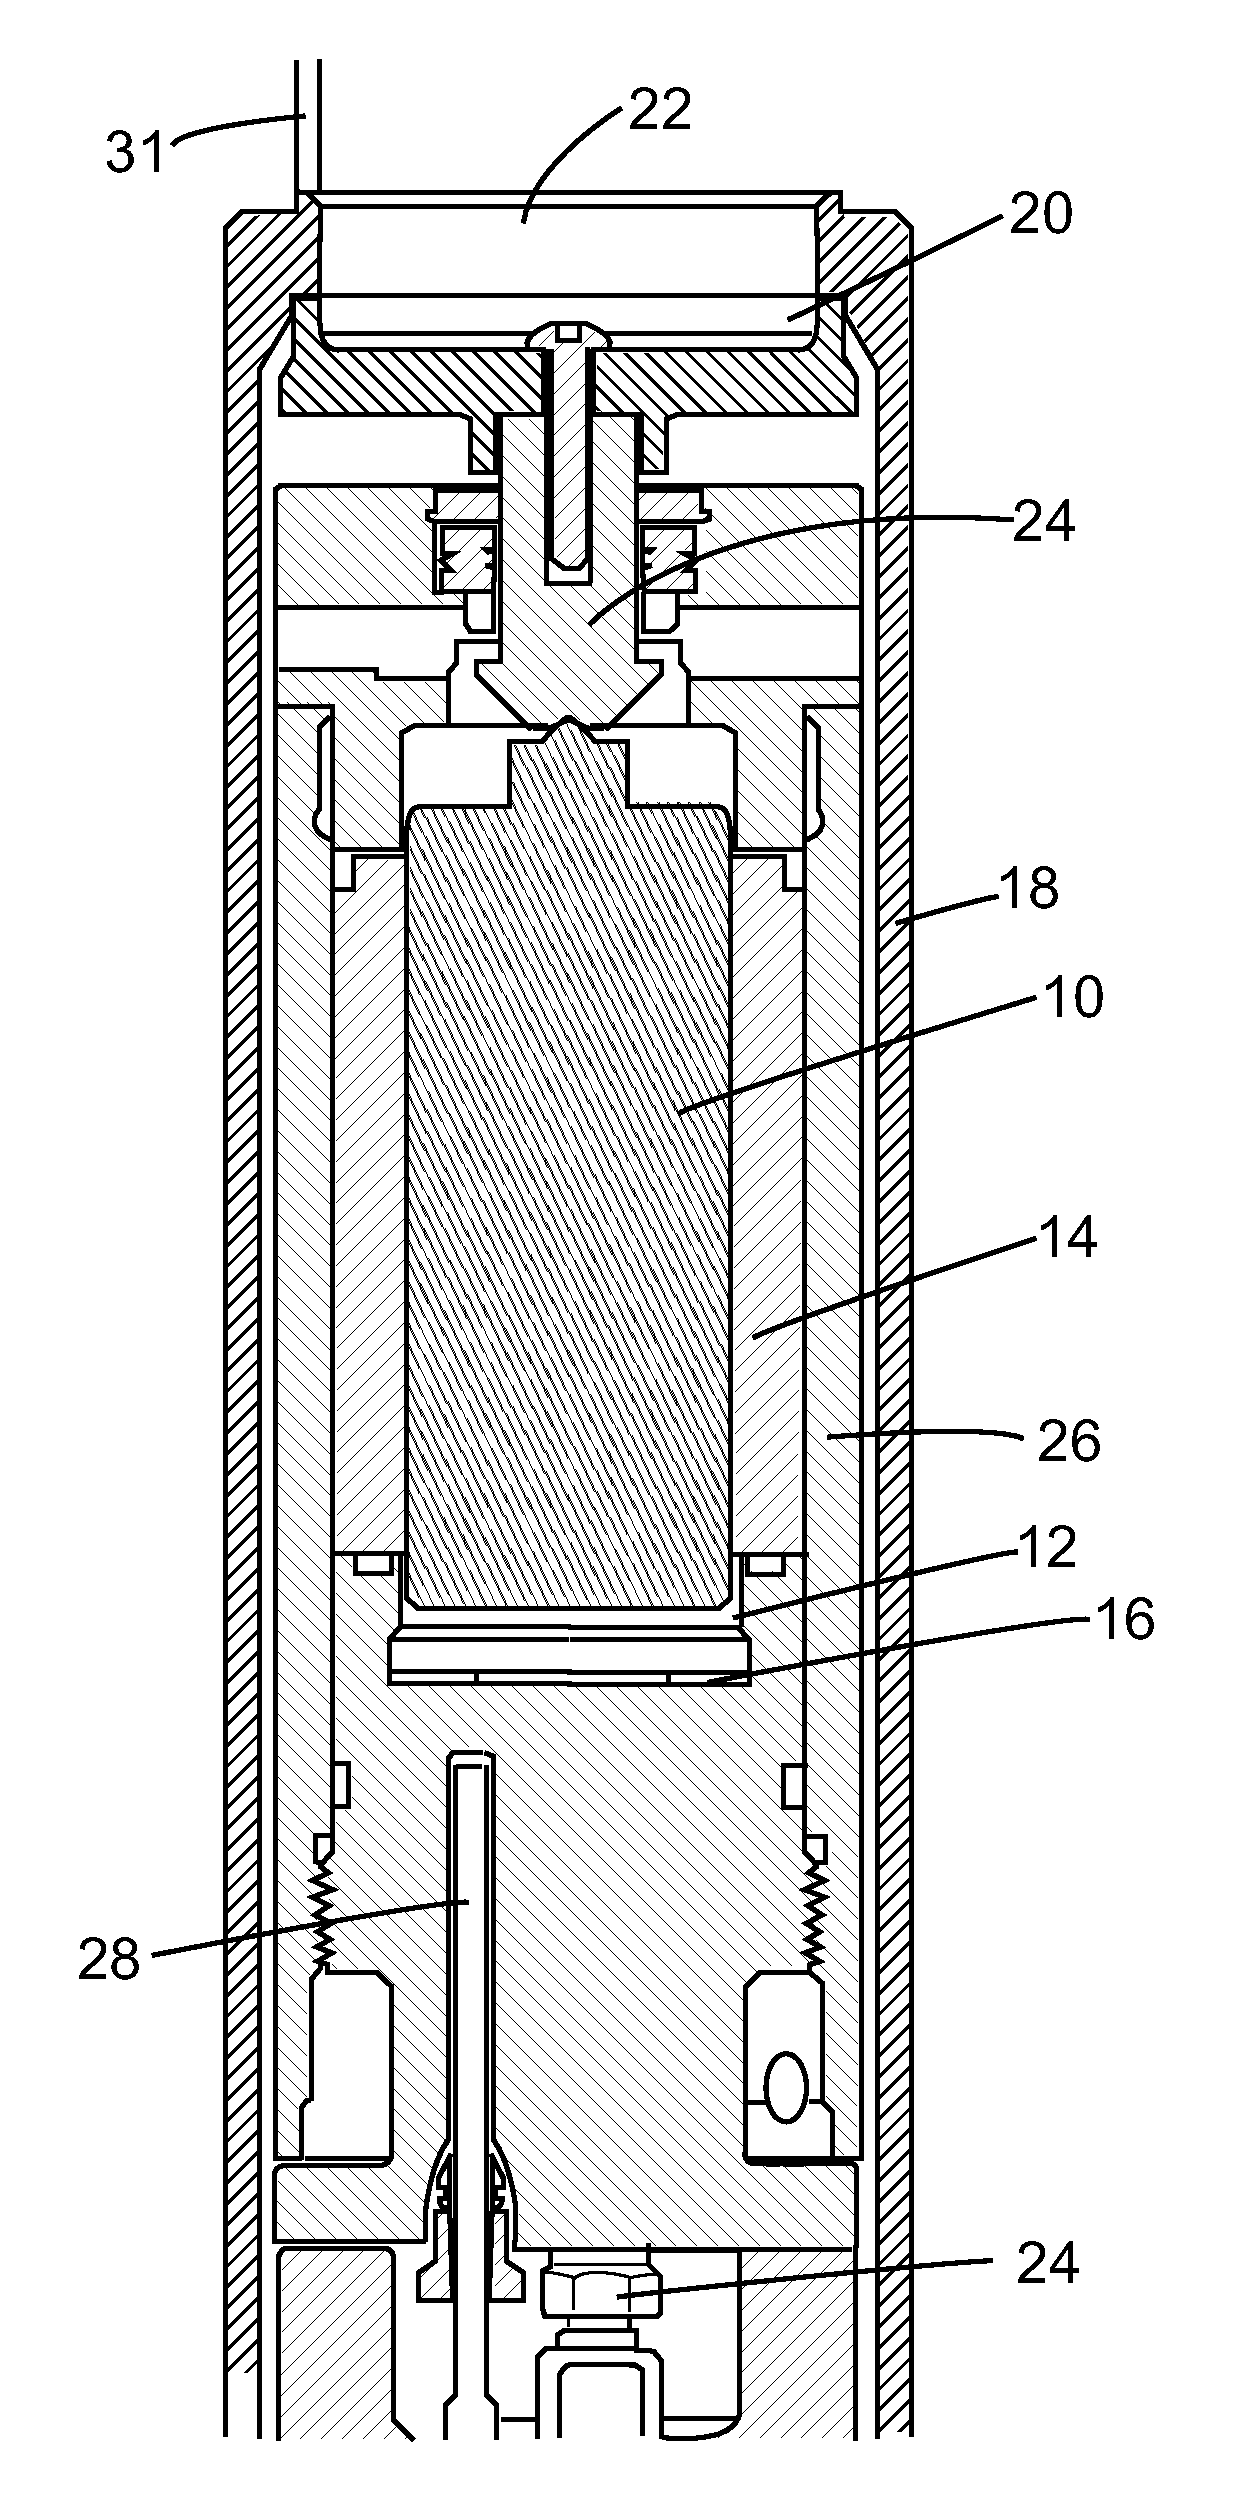 Method of determining the zero-clearance pressure in a controlled clearance piston gauge